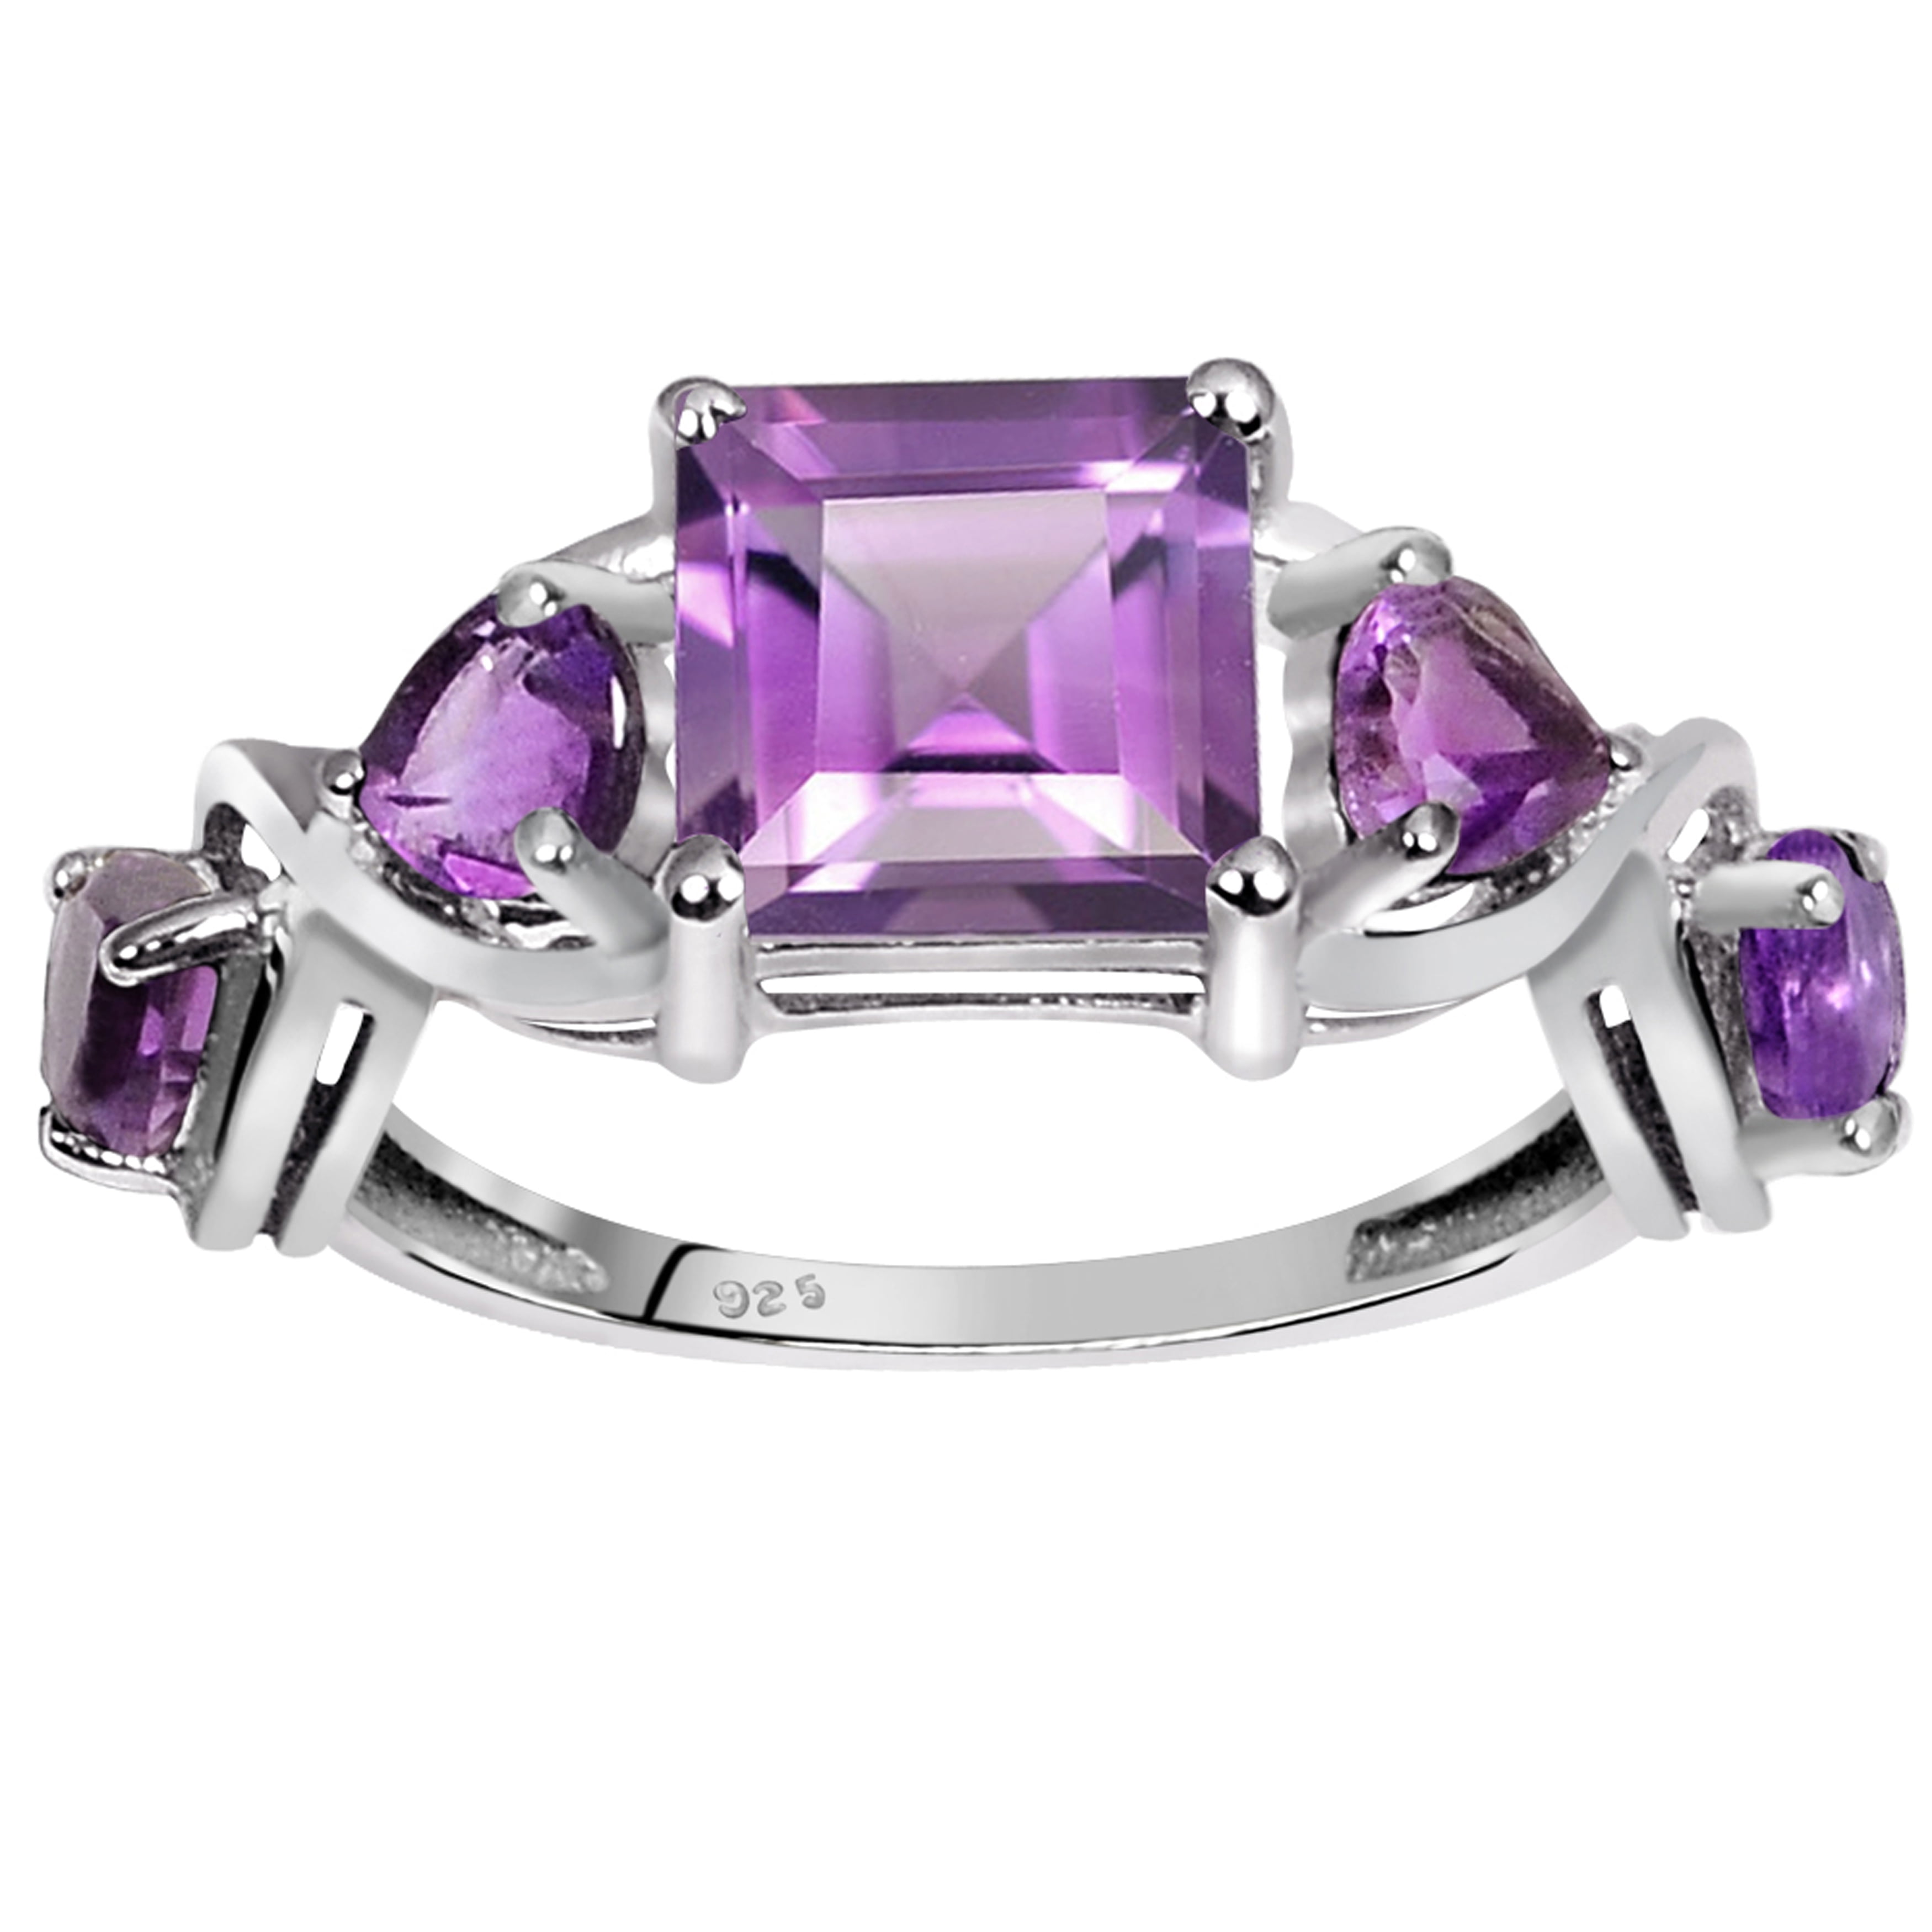 Details about   Size 7 Sterling Silver Amethyst Heart Ring